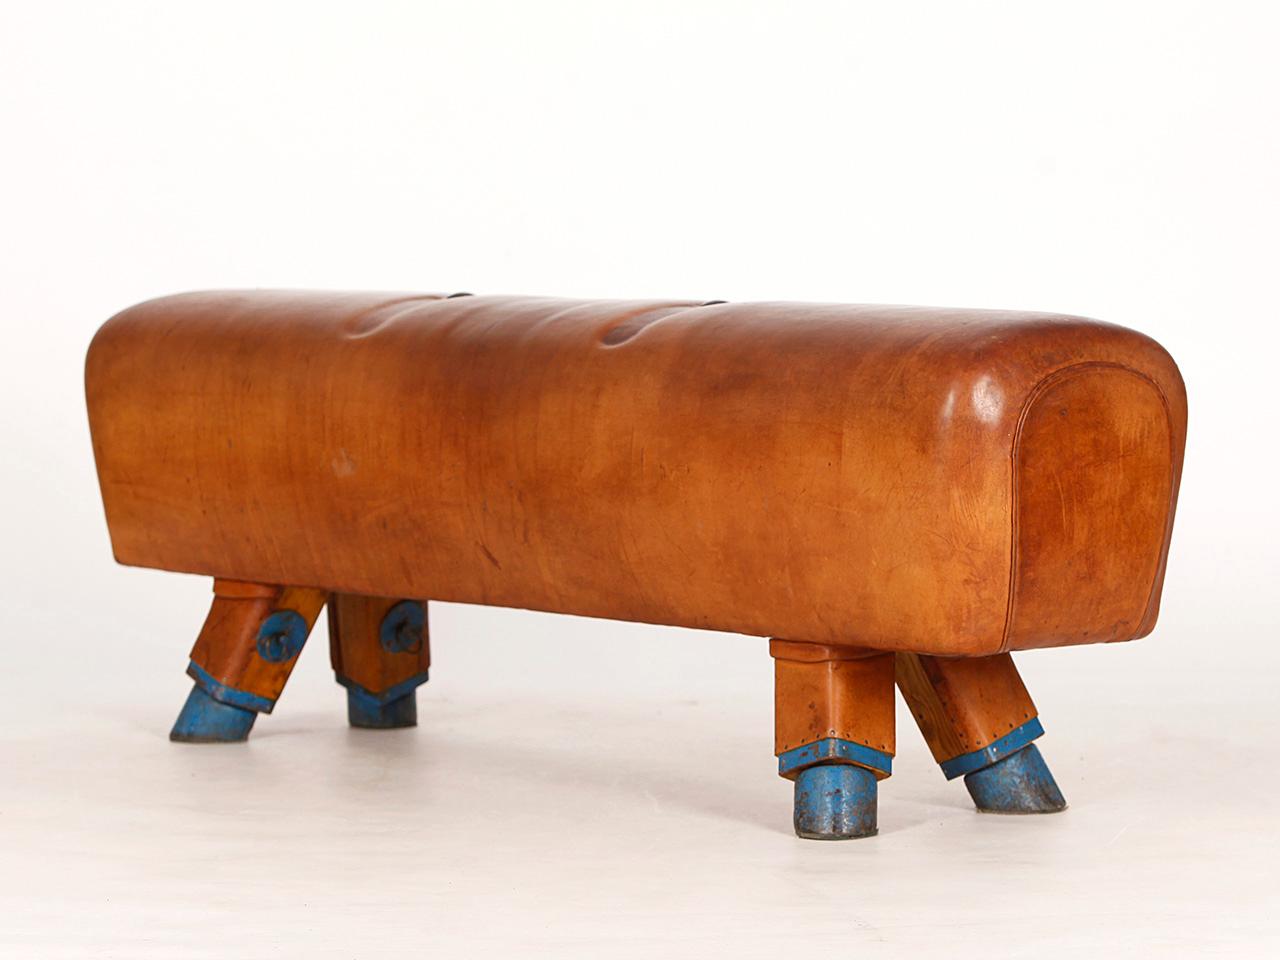 Pommel horse from former Czechoslovakia. The legs were cut to a height of 53cm. The thick leather has been cleaned and the patina was retained. Very good vintage condition.